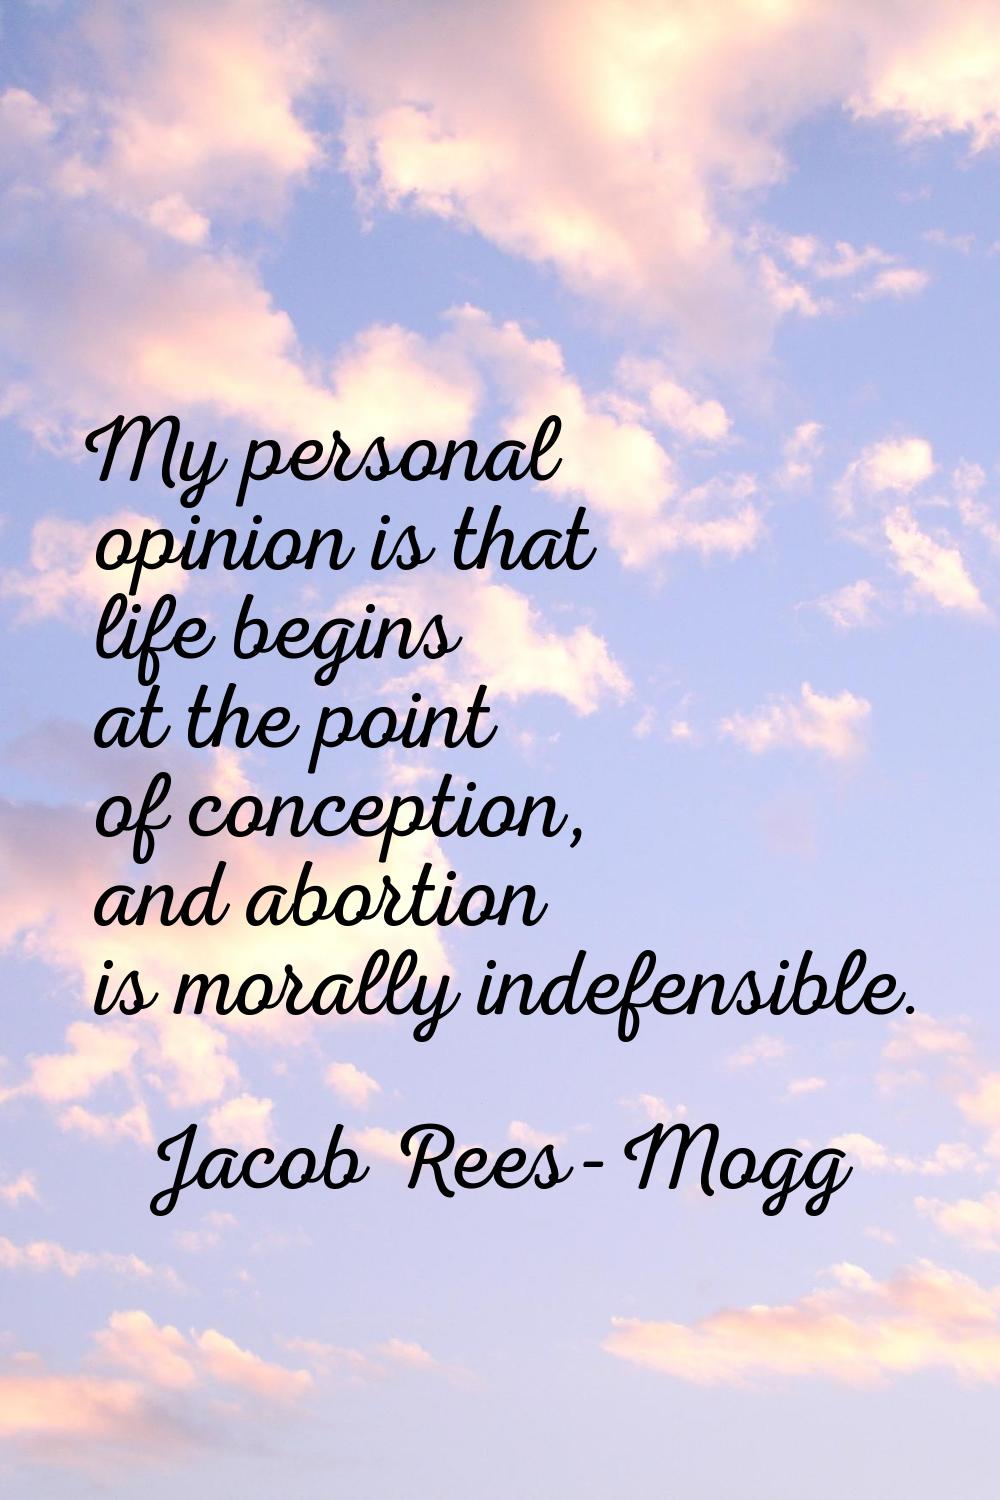 My personal opinion is that life begins at the point of conception, and abortion is morally indefen